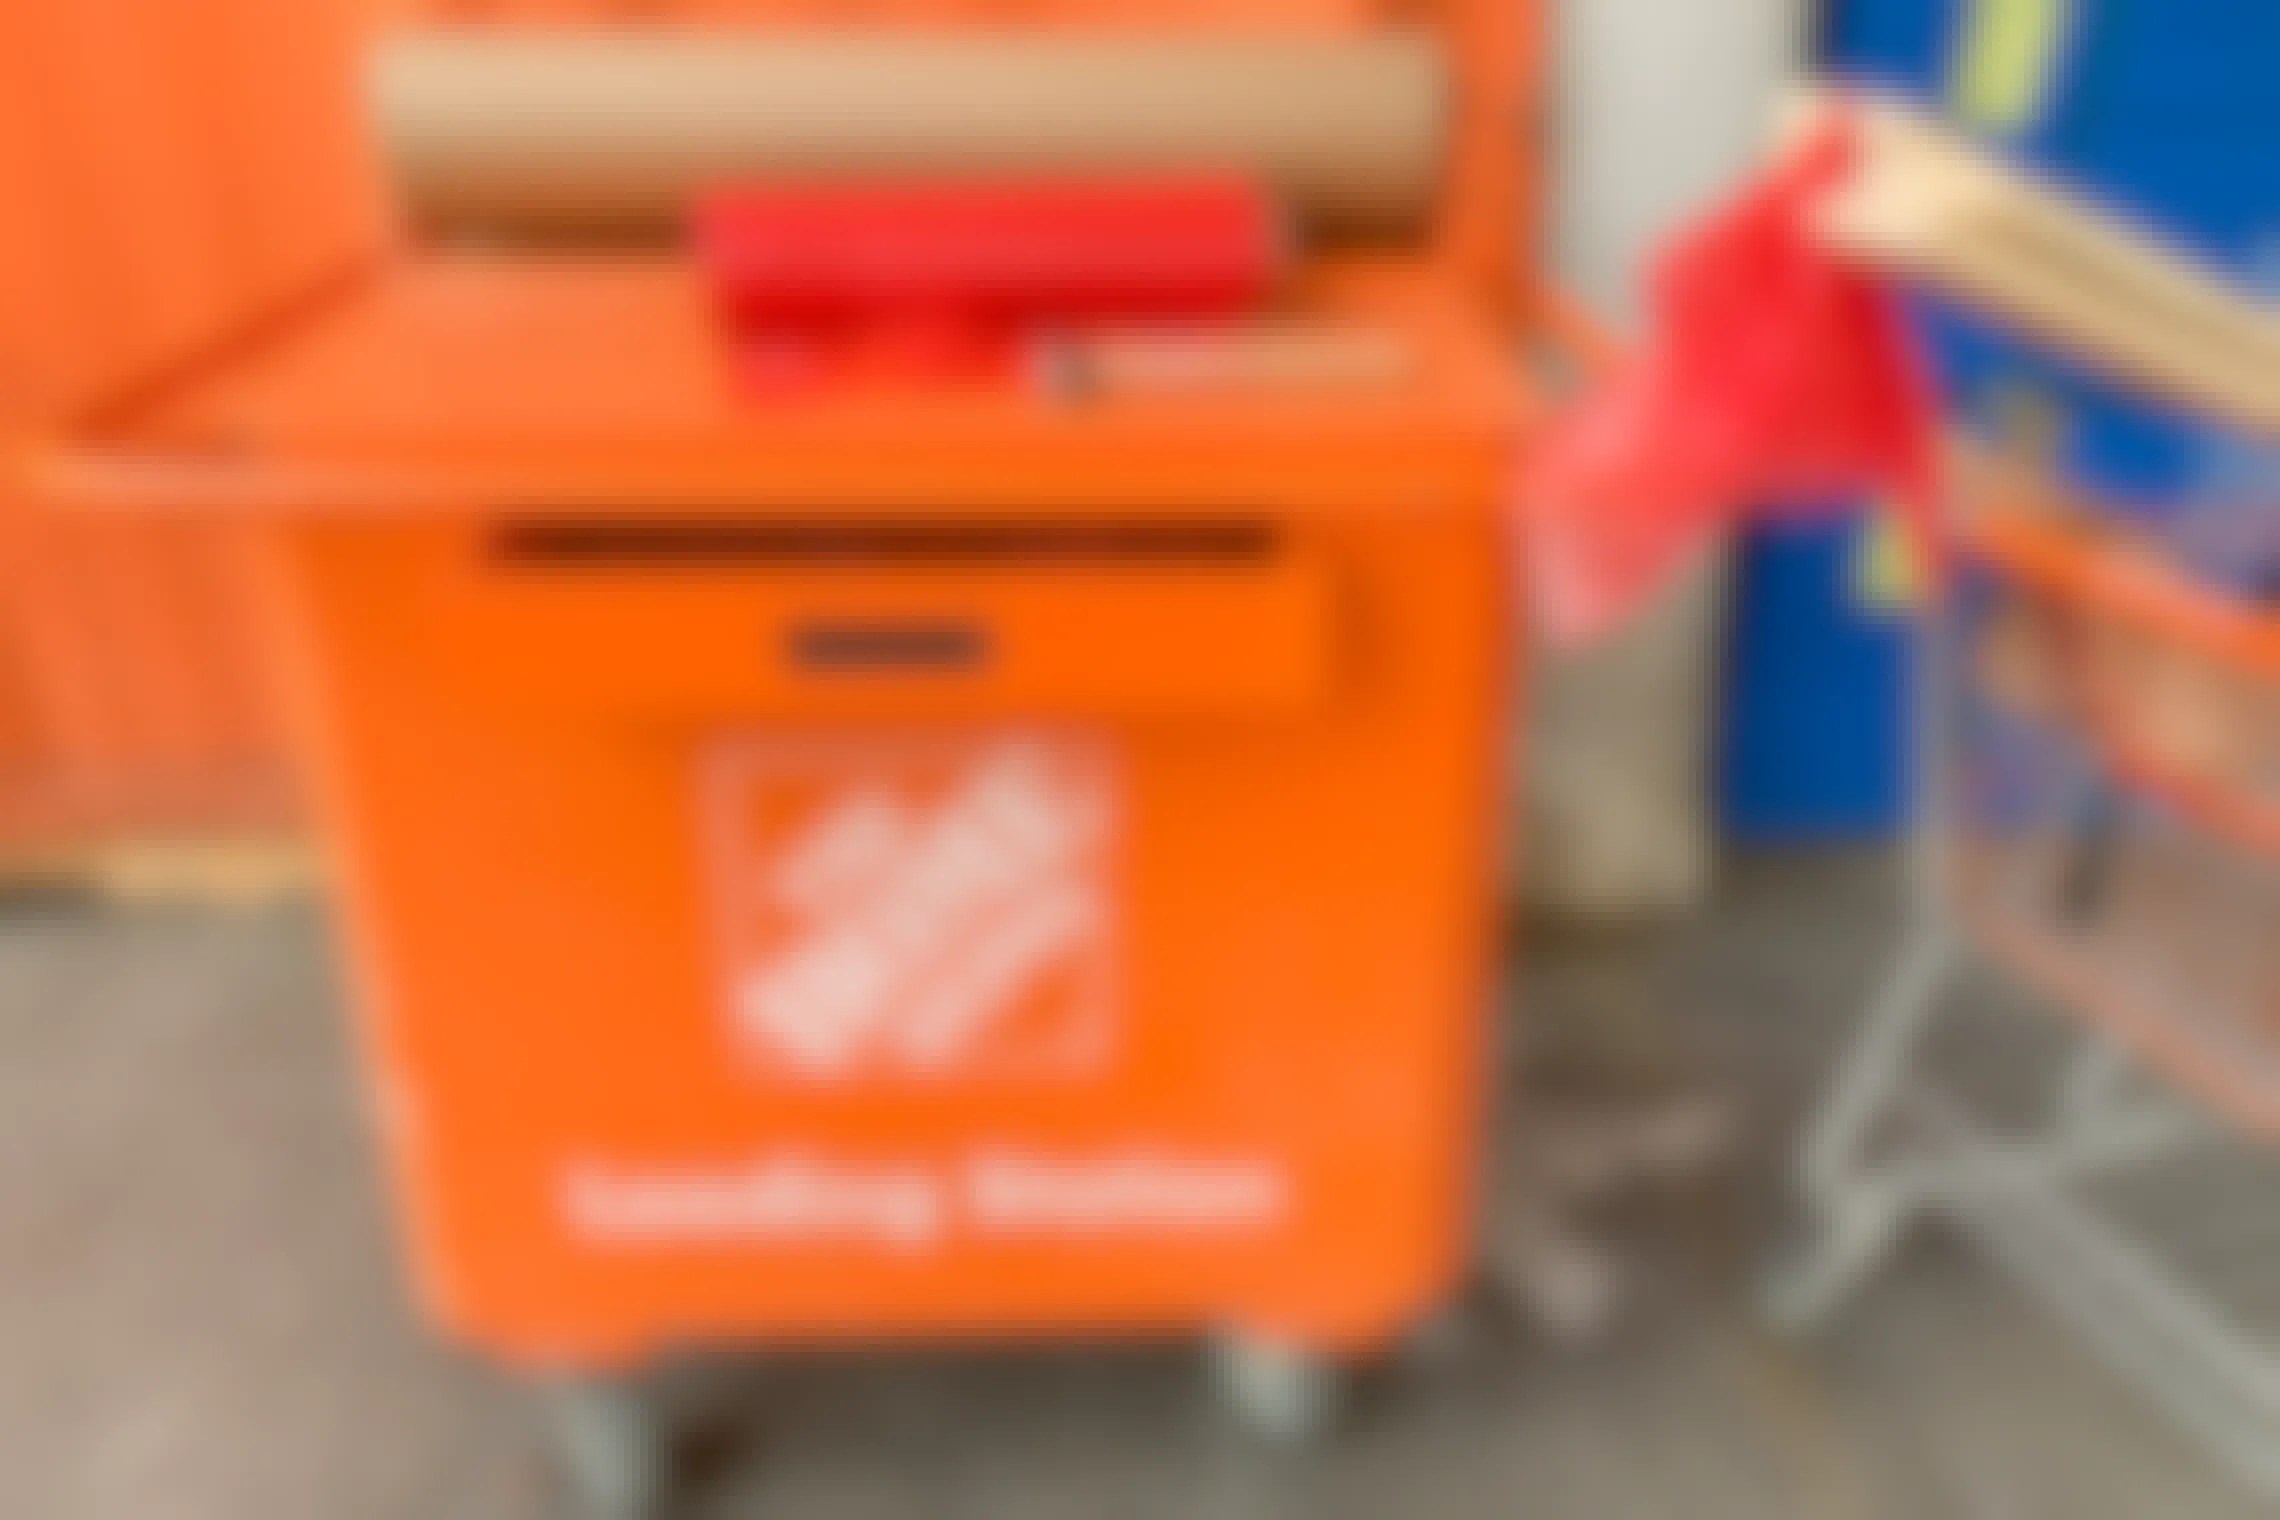 The home depot loading station cart with a hammer, red plastic flags and brown paper next to a cart with lumber in it.